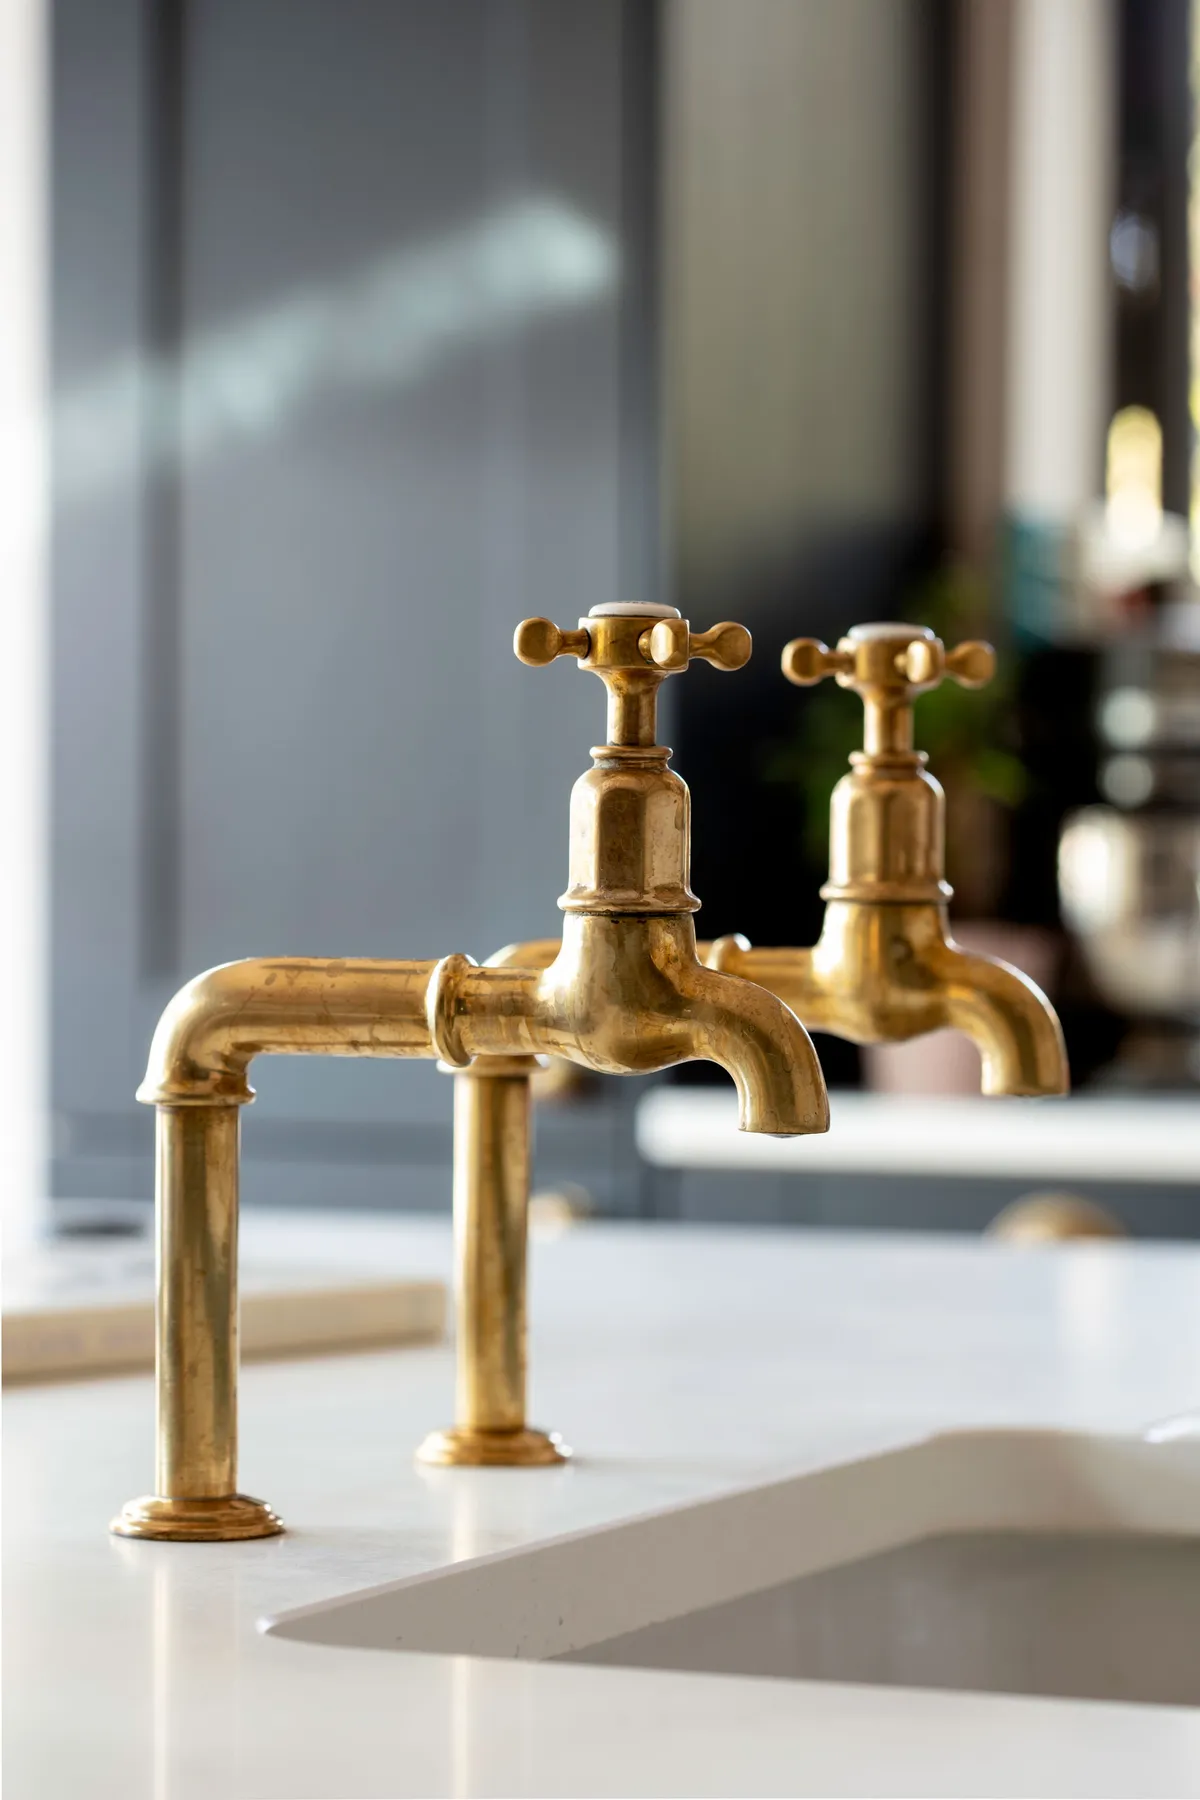 Sara added vintage designs to her modern scheme, including brass taps ‘They were an utter splurge, but worth it!’ she says